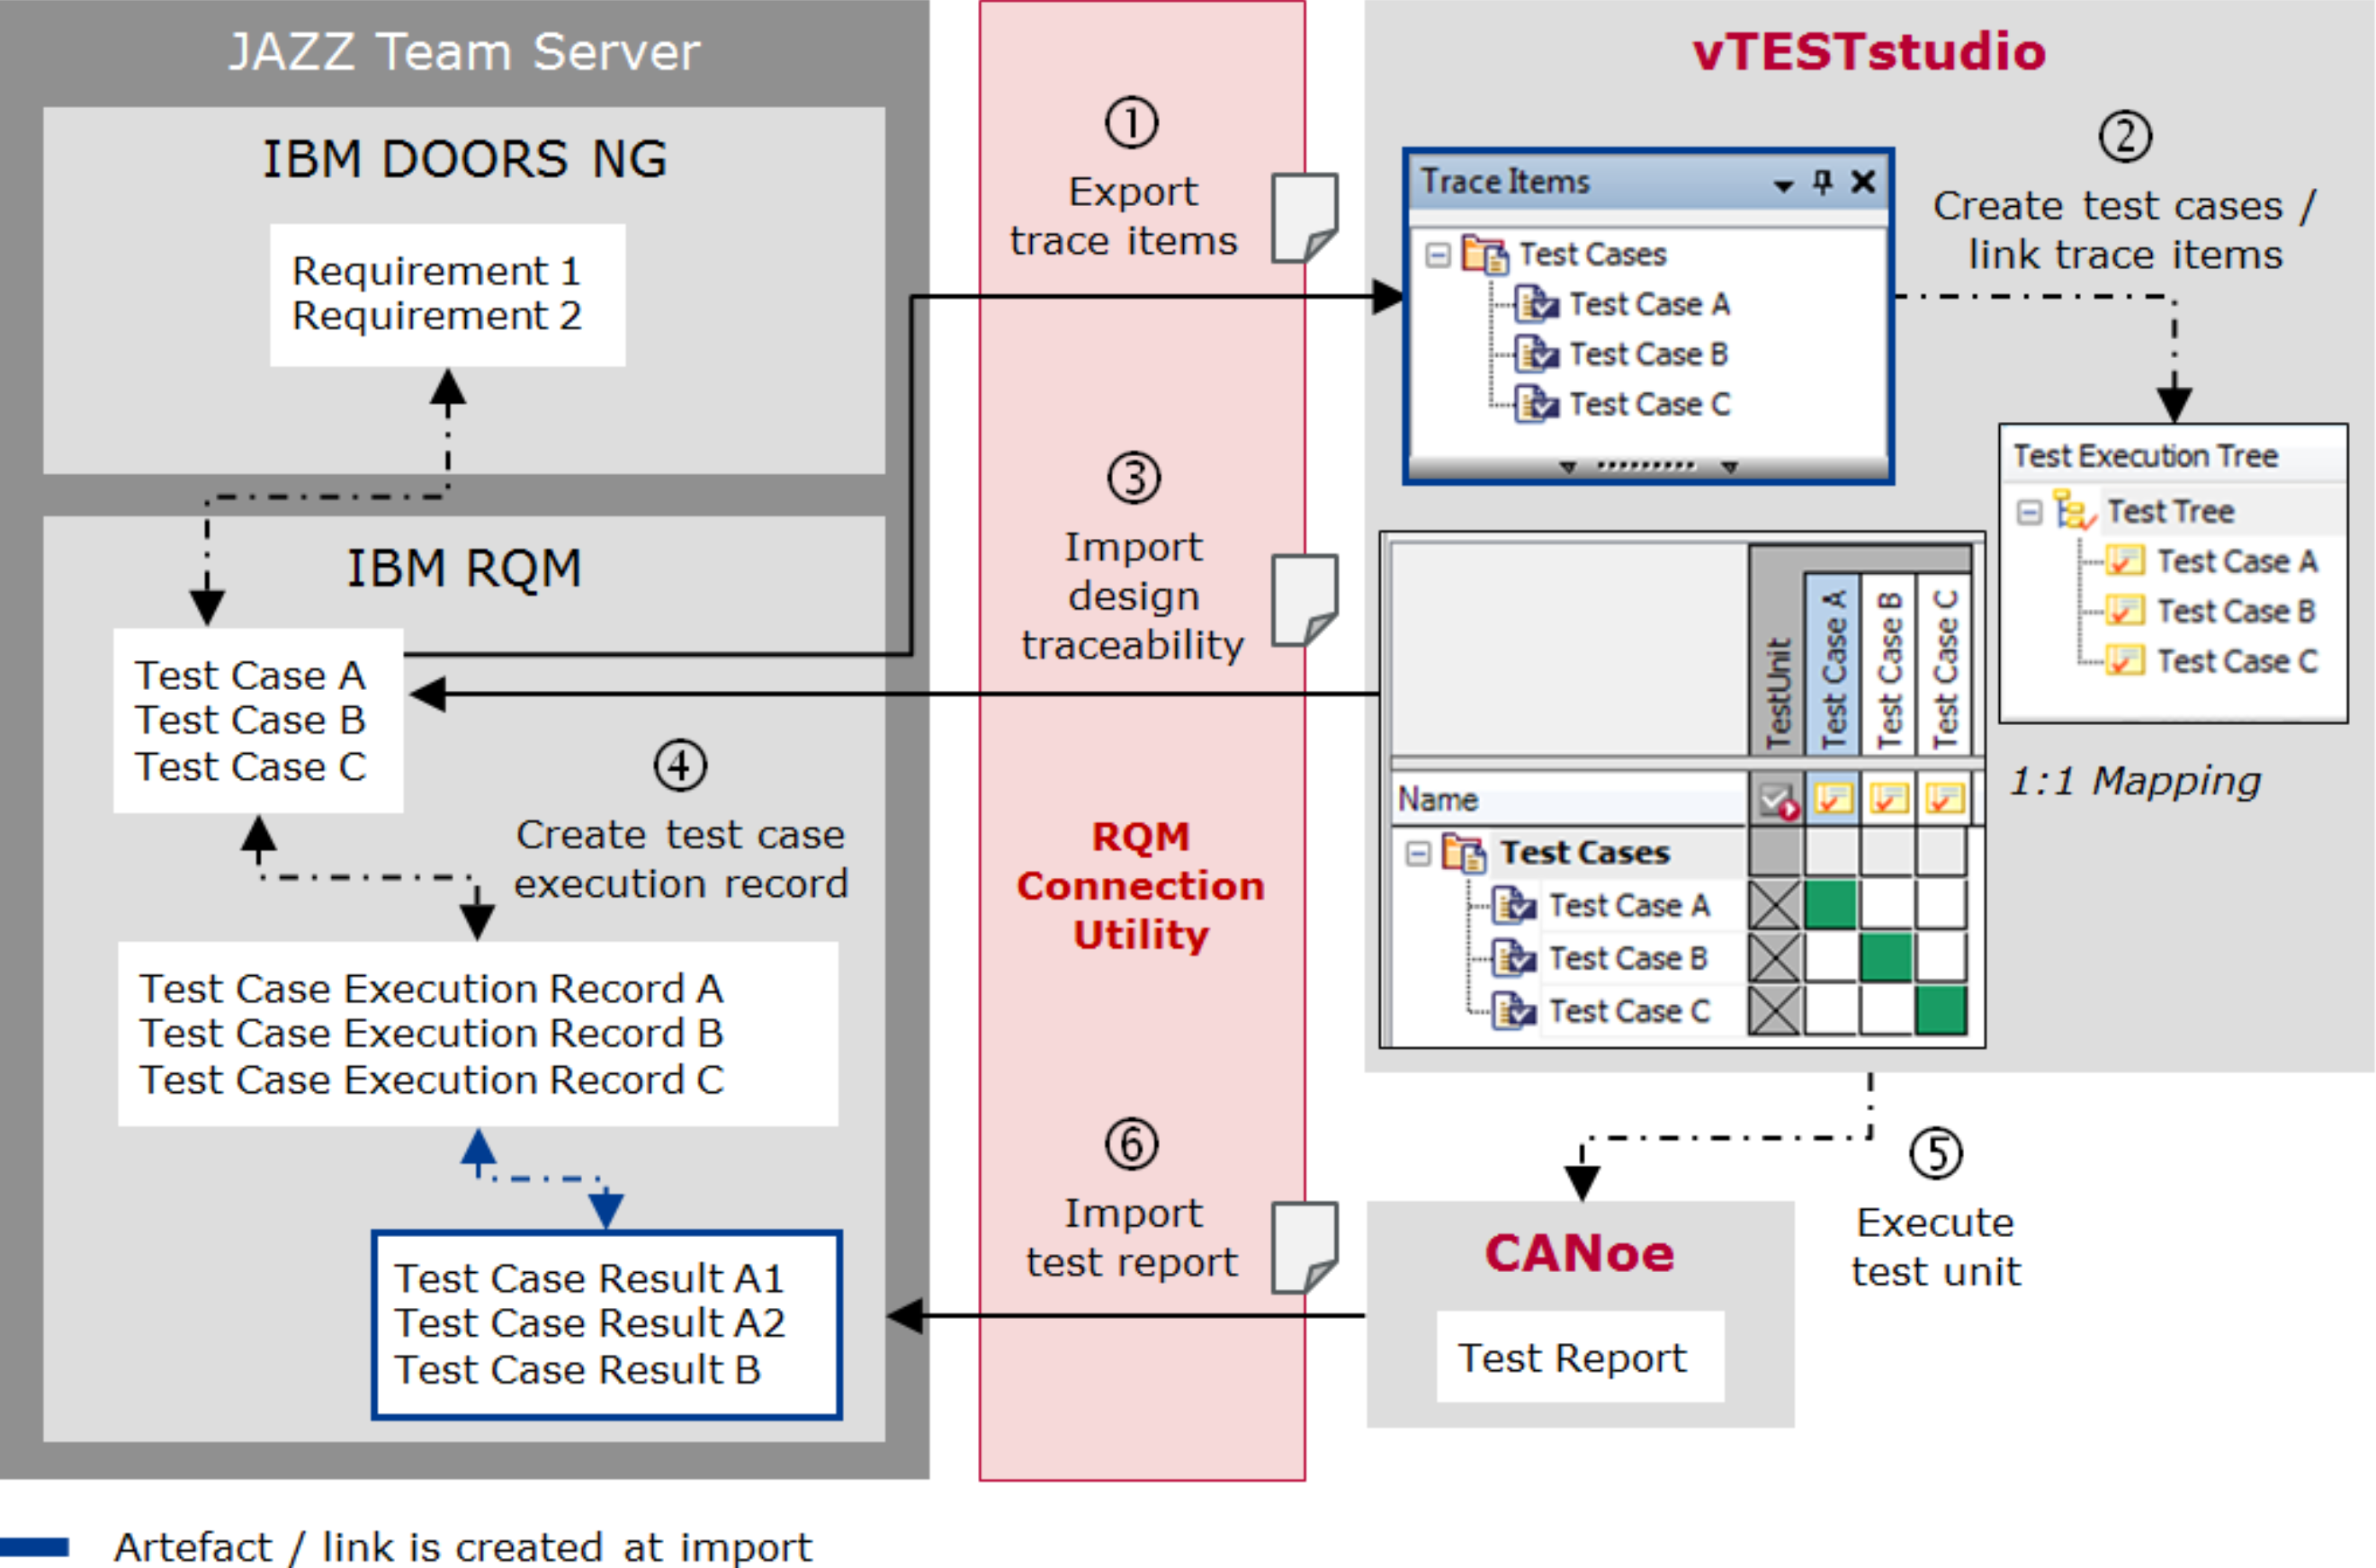 Interface of import/export functionality in through Jazz team server and vTest Studio